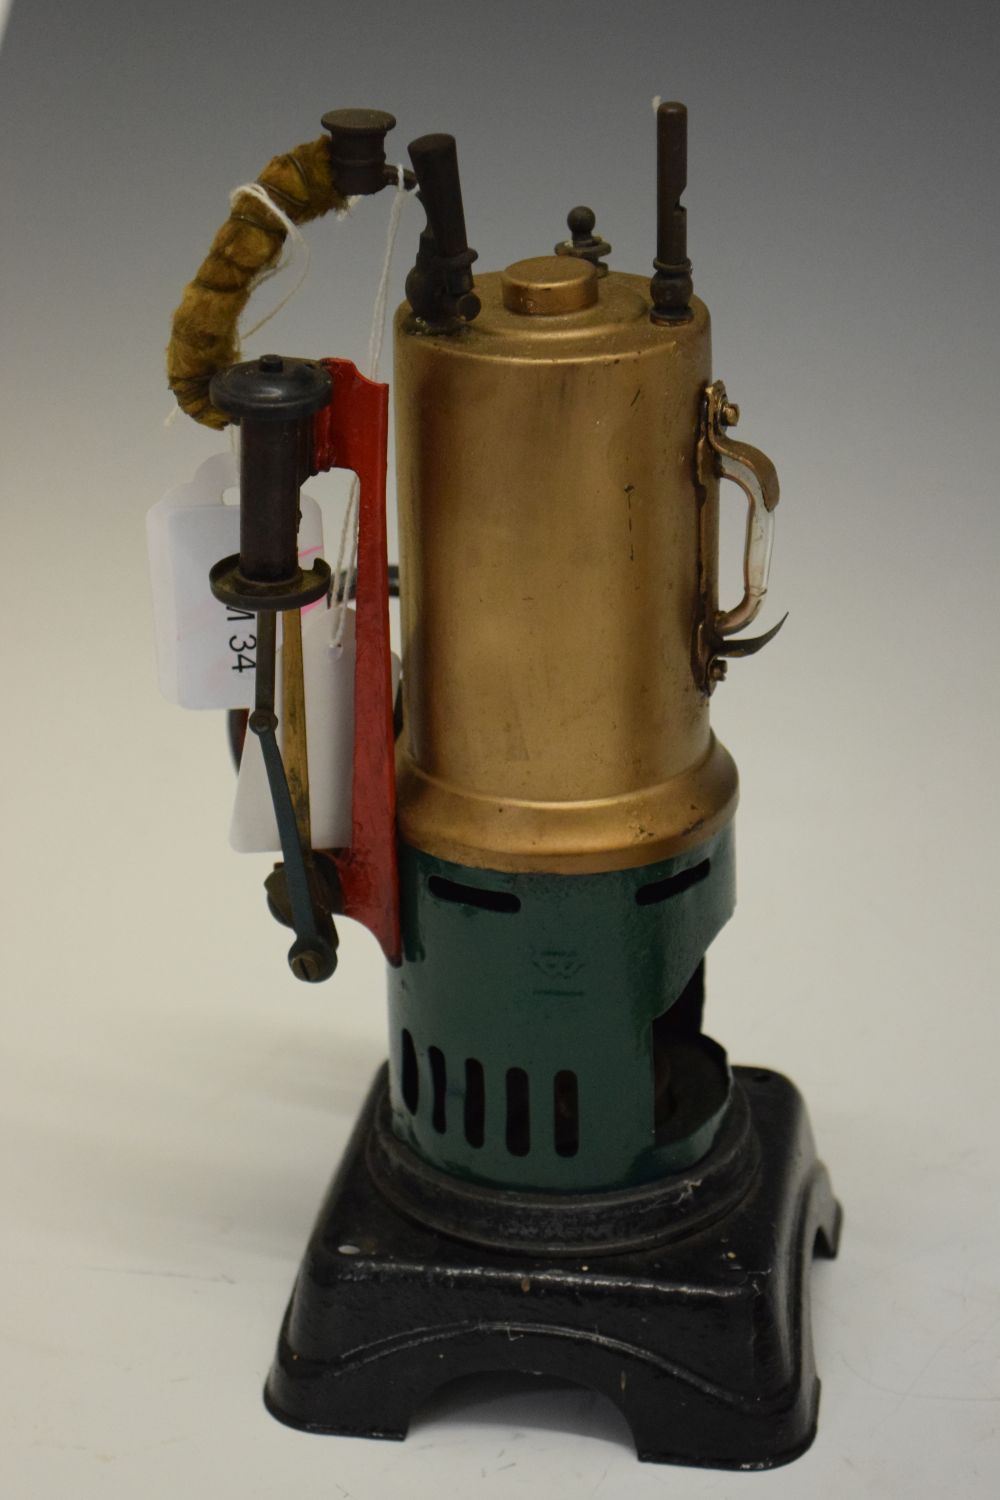 Stuart Turner model No.10 stationary steam engine, with 3-inch single fly wheel, 15cm high, on - Image 3 of 11